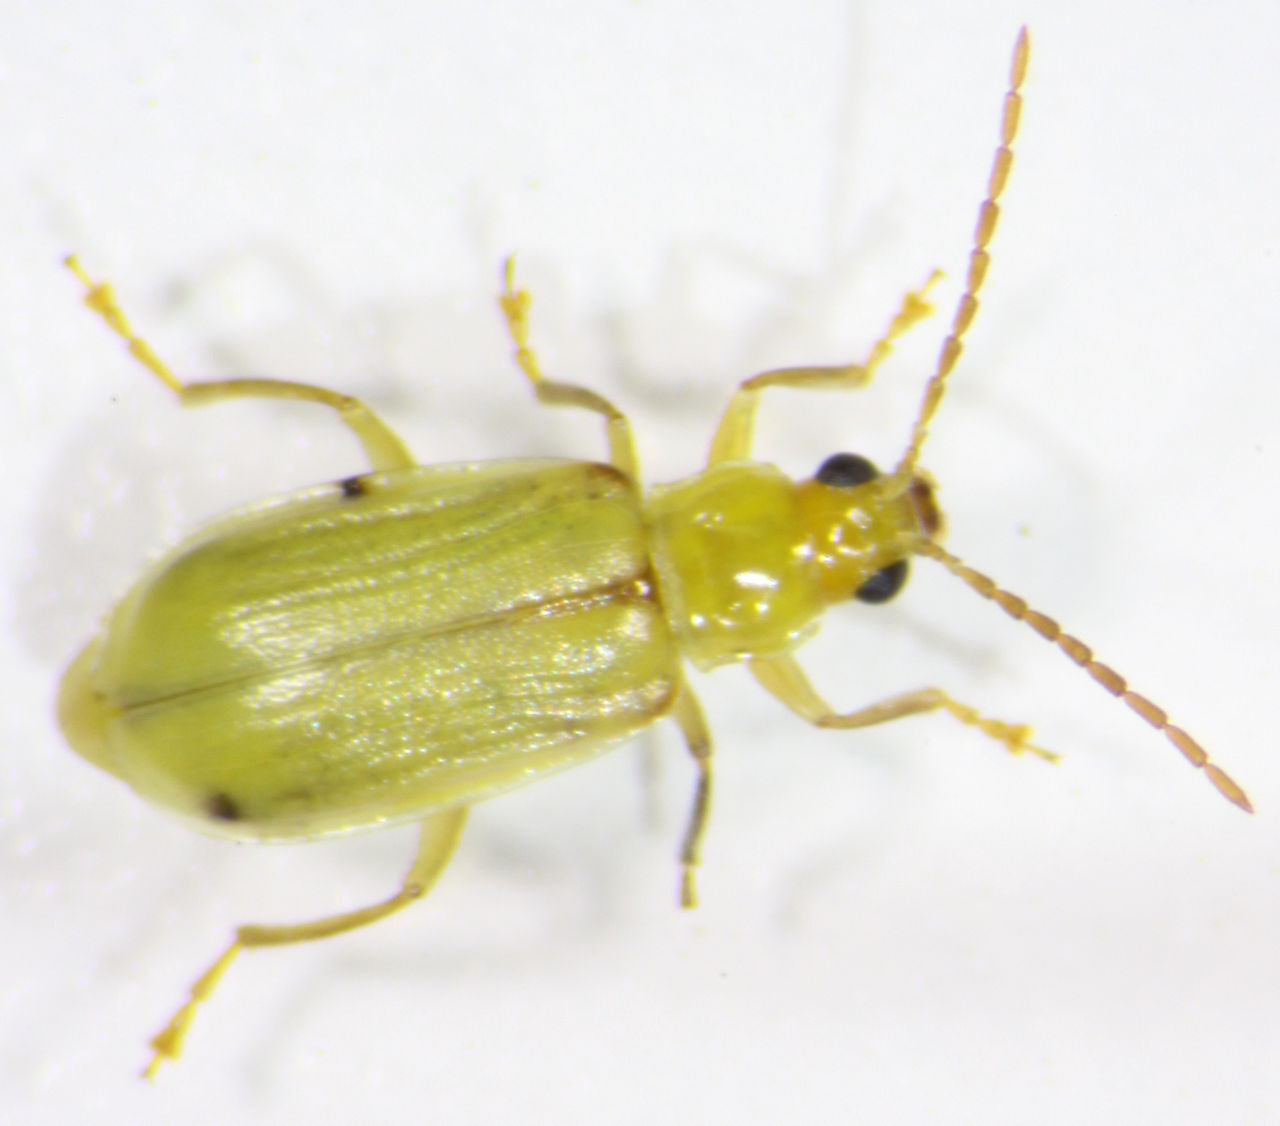 Northern Corn Rootworm - Adult 2